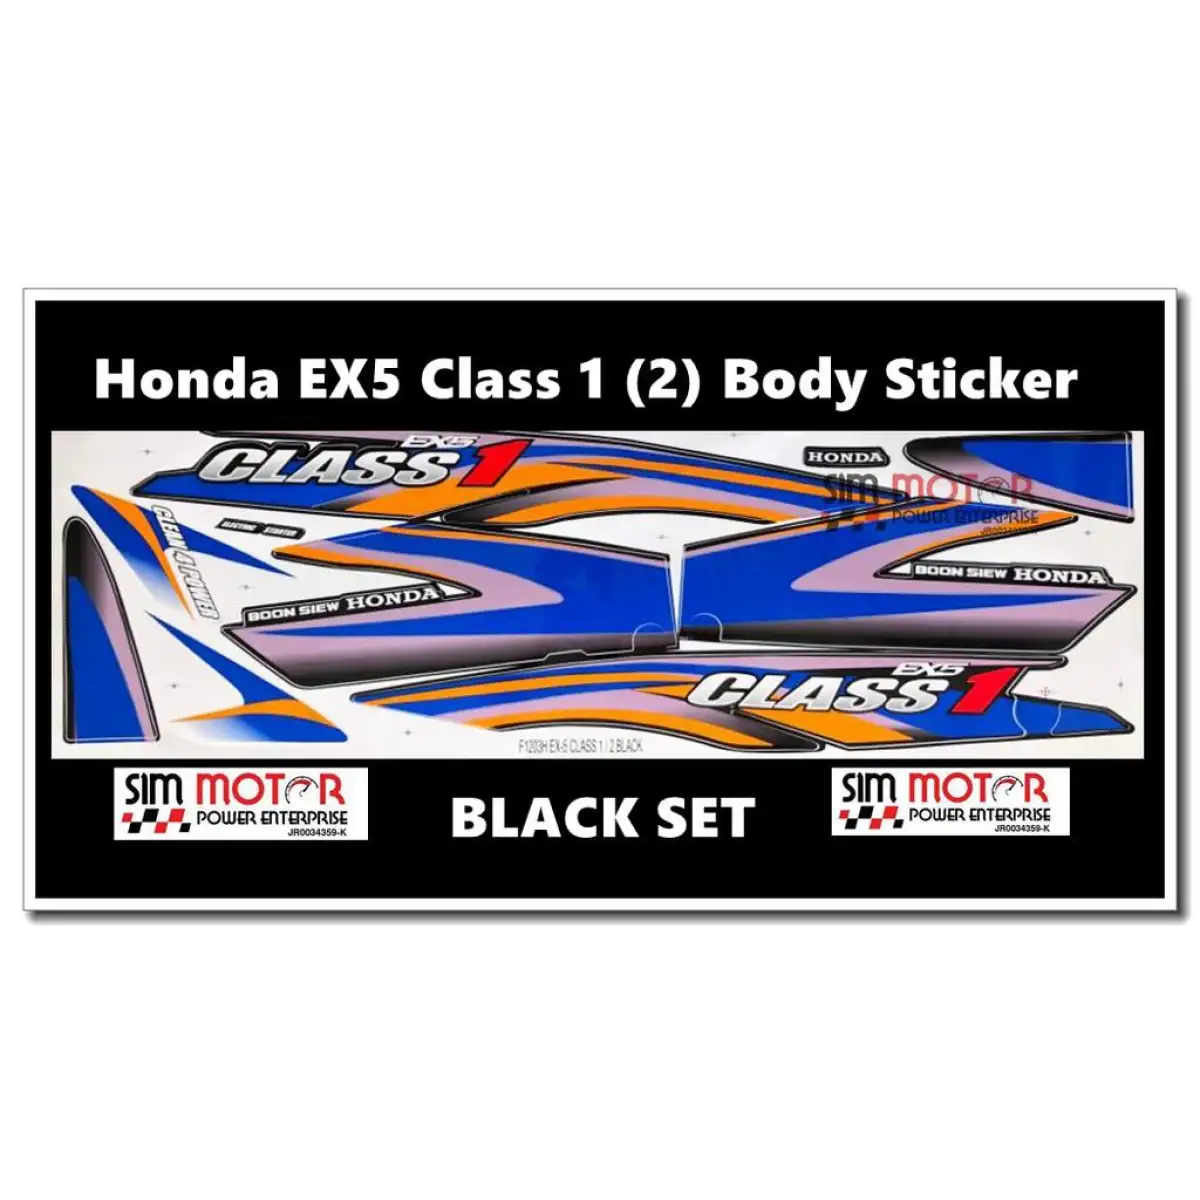 Class 1 specifications ex5 Core Specification